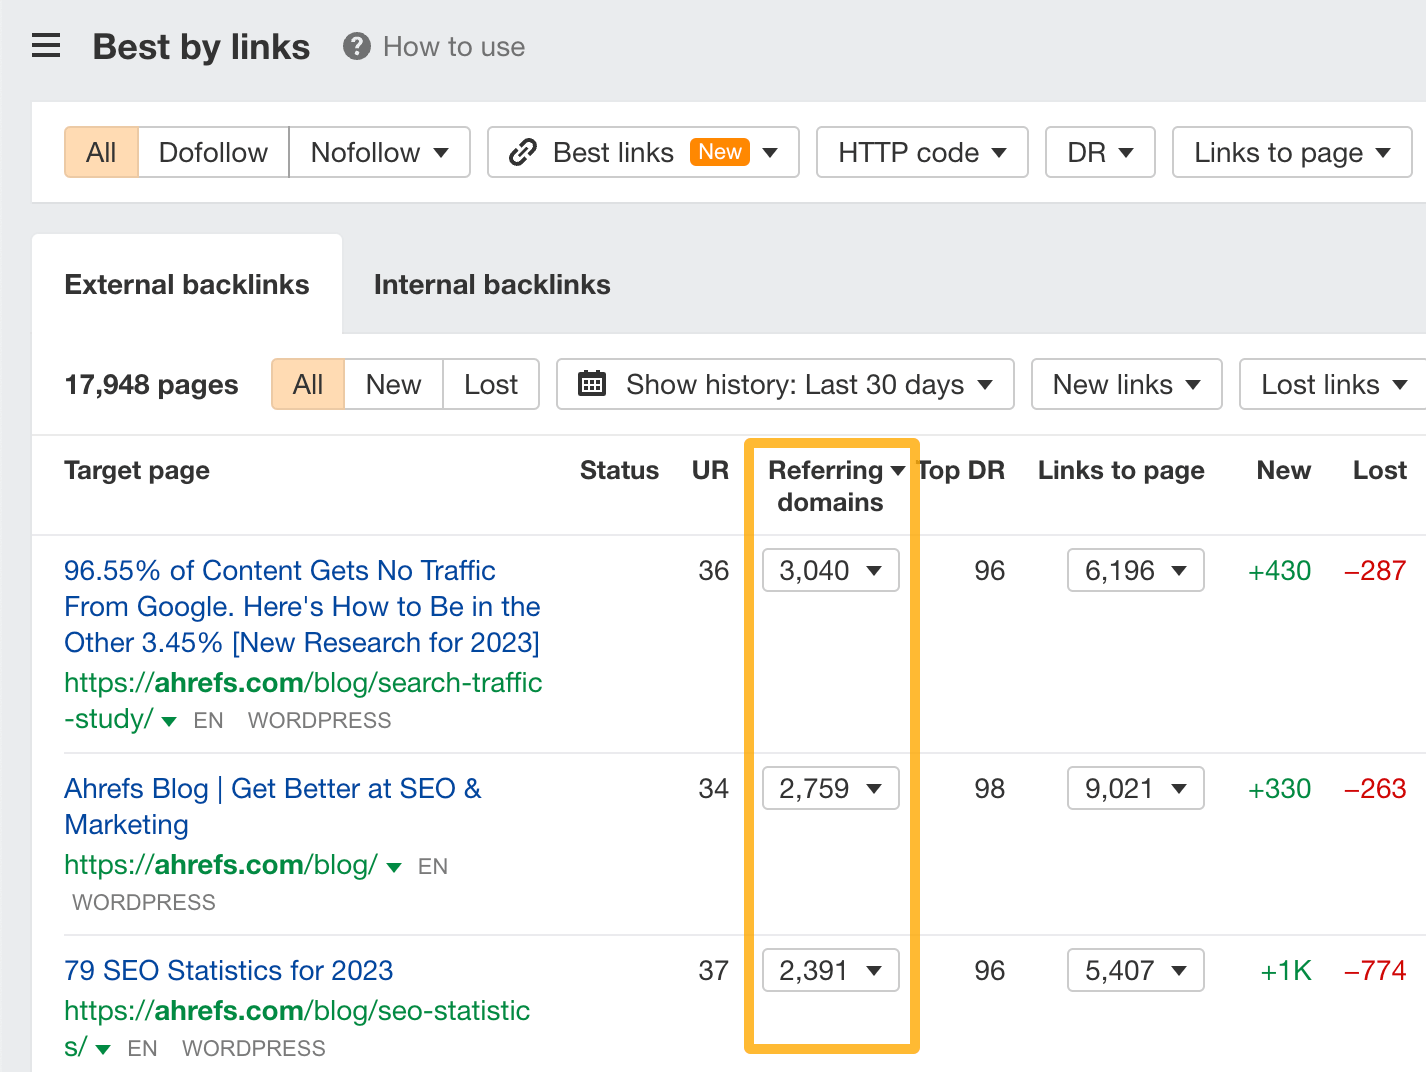 Best by links report in Ahrefs.